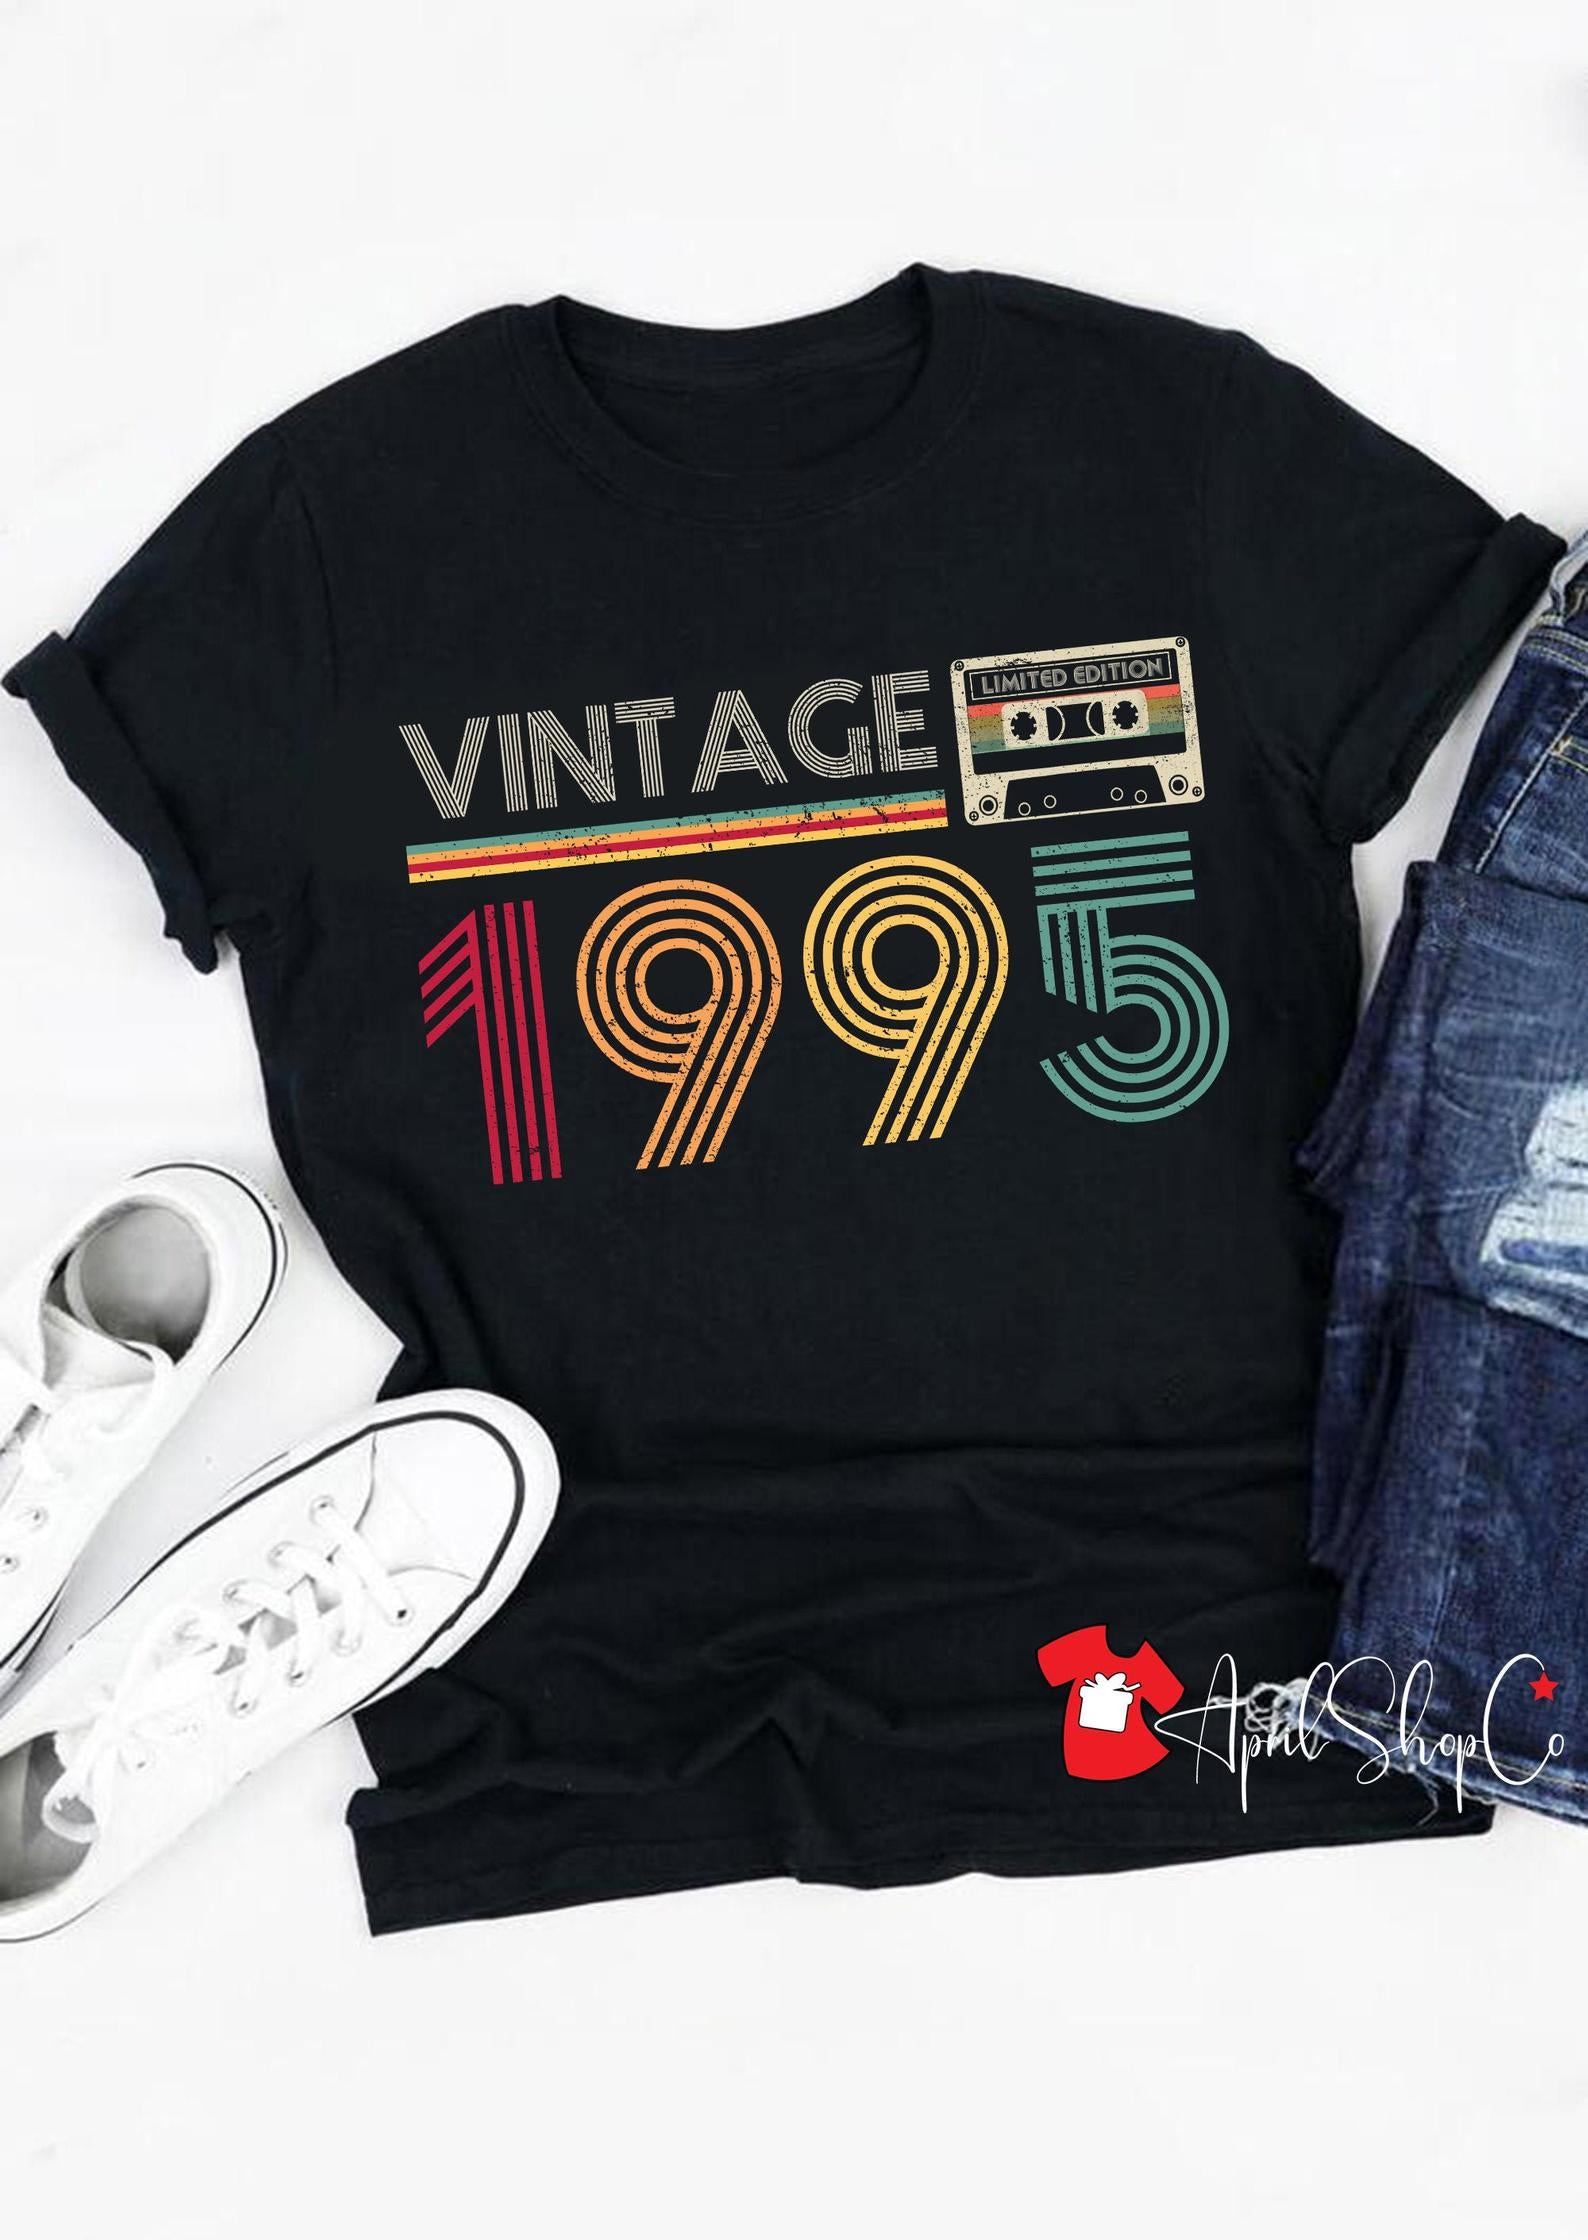 25th Birthday Vintage Gift for women T shirt s-3xl